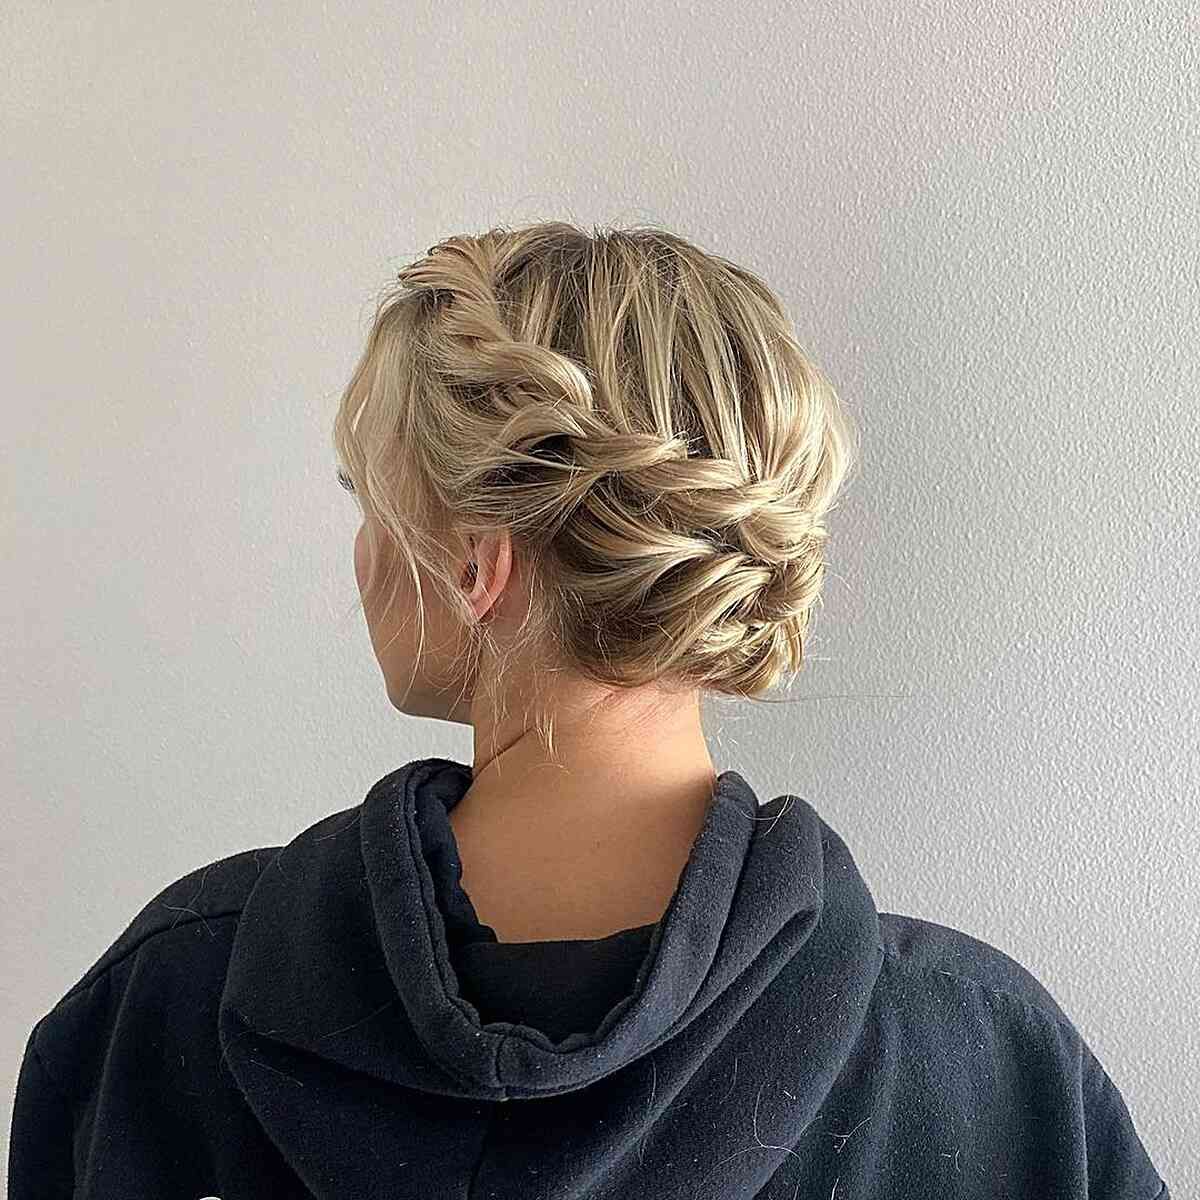 Stunning Prom Hairstyles for Short Hair to Rock the Dance Floor